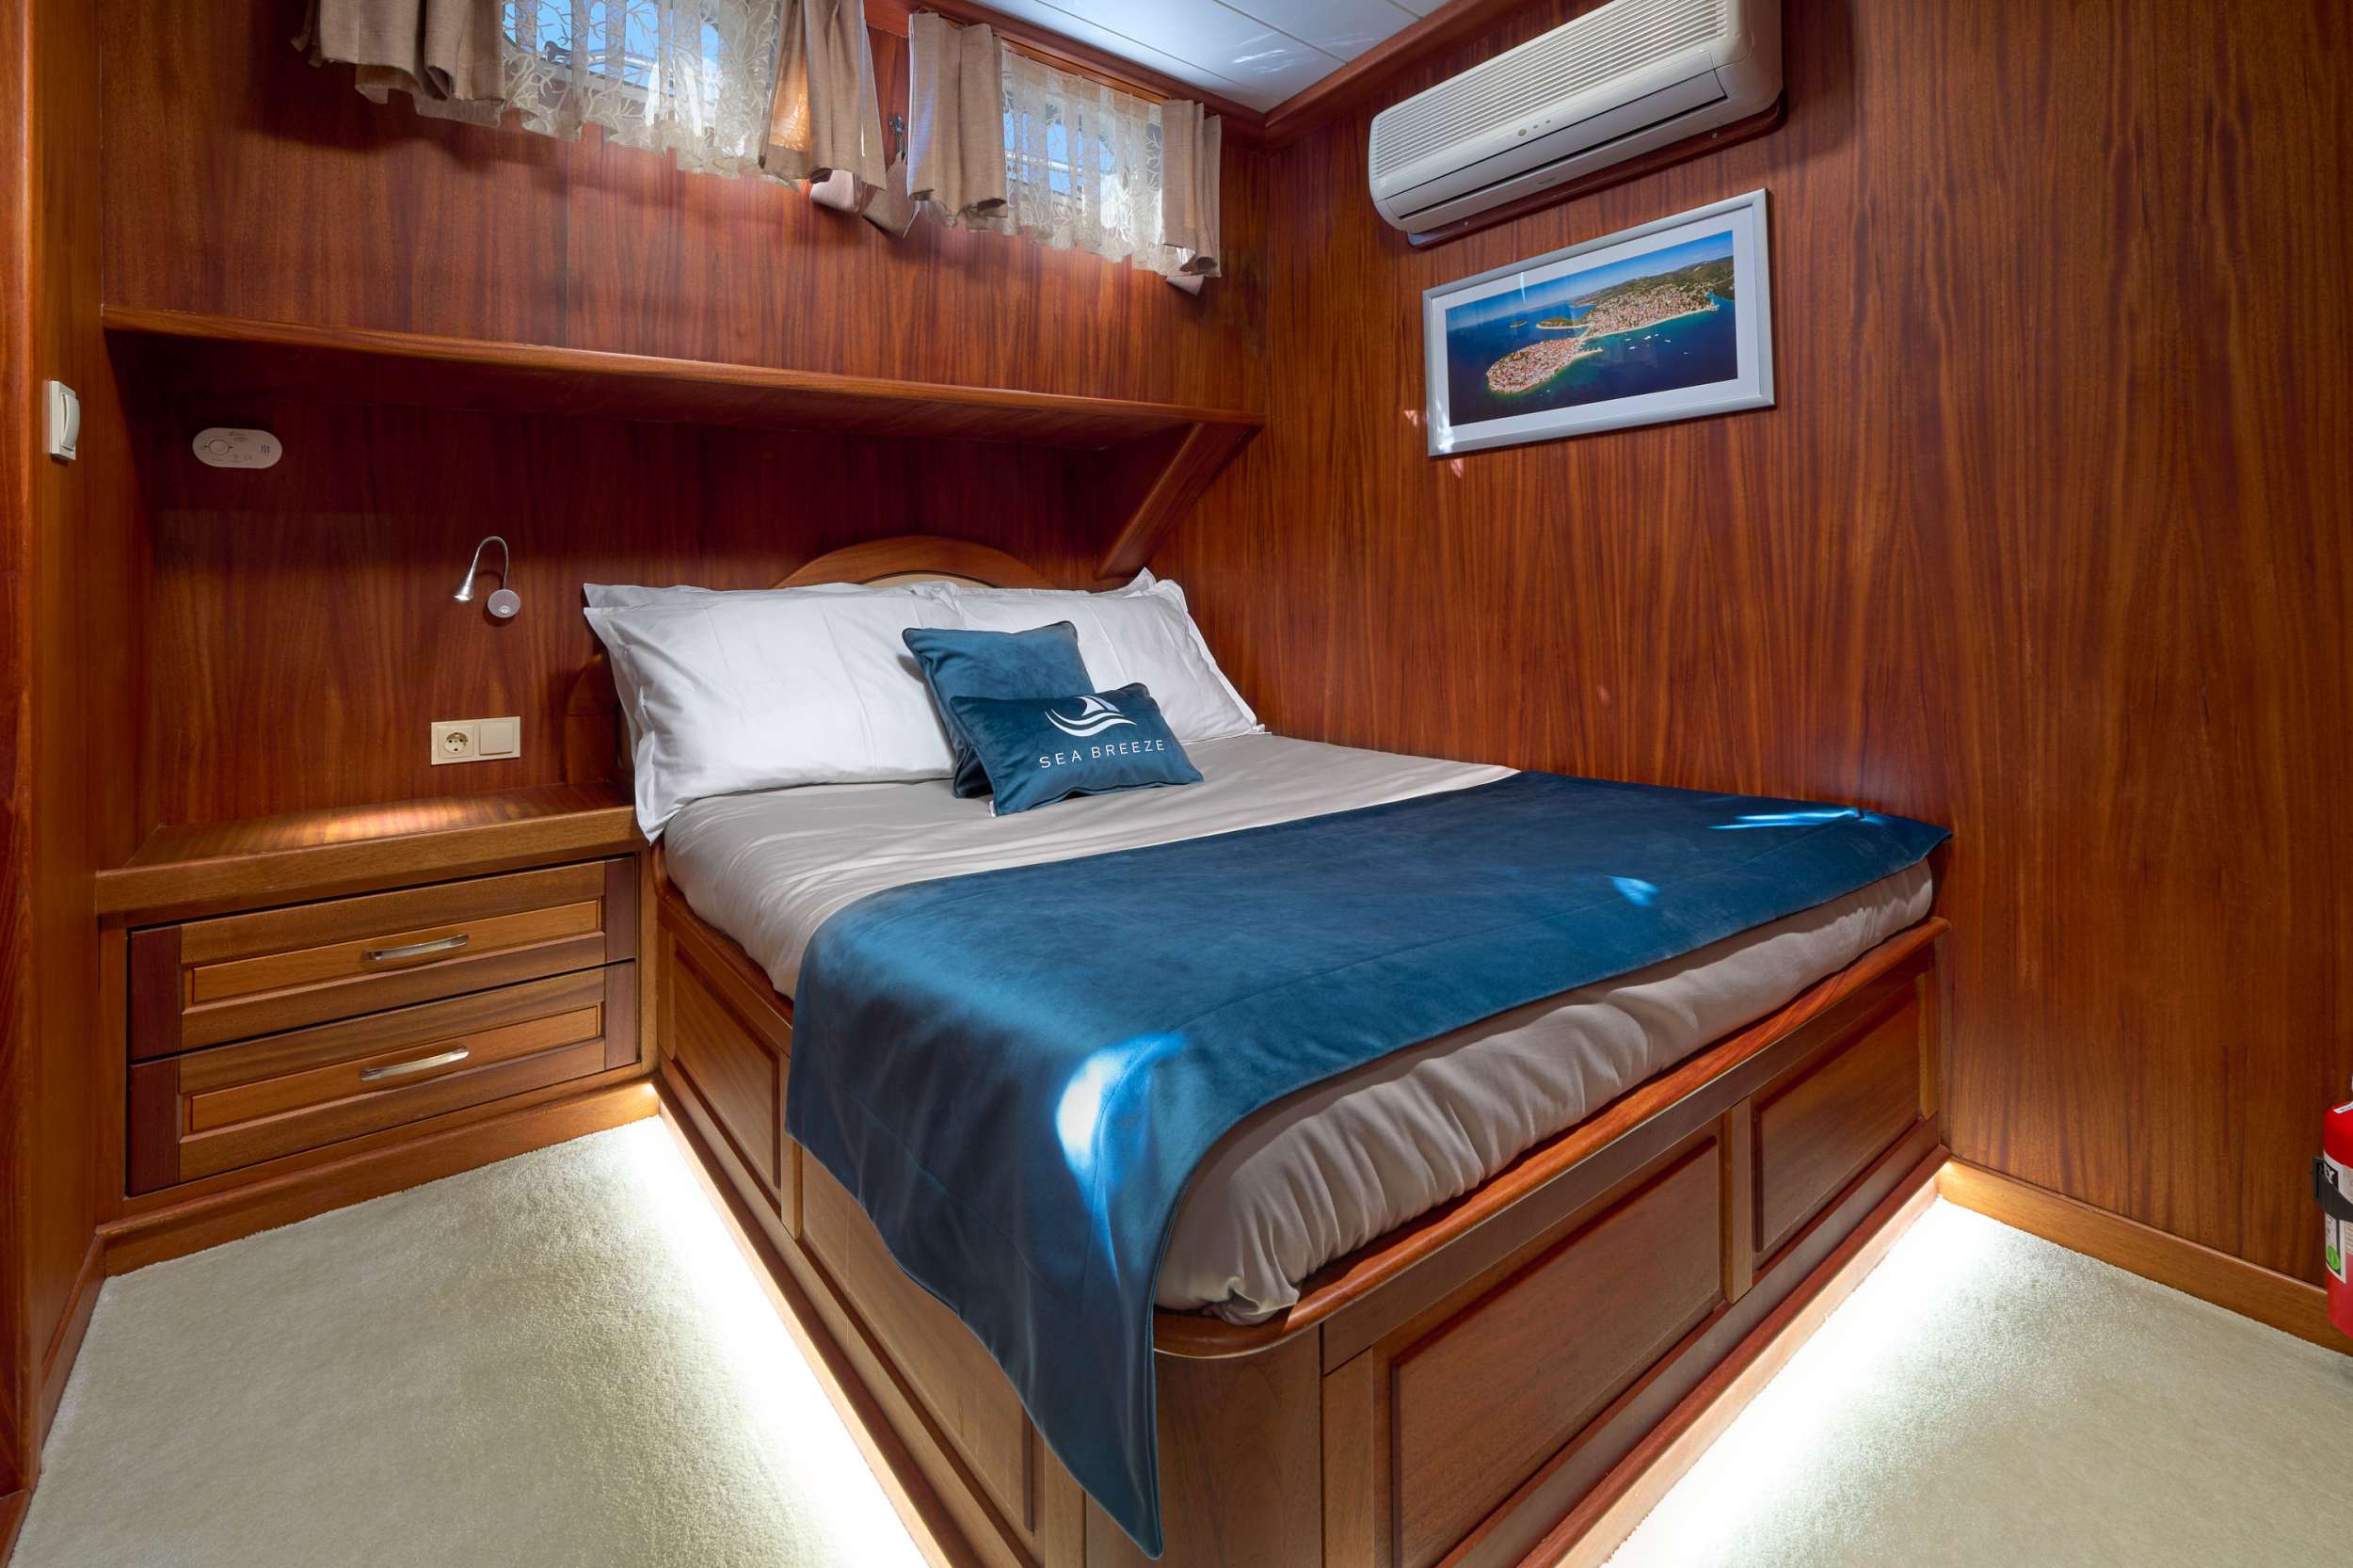 SEA BREEZE Yacht Charter - Master Cabin Bed